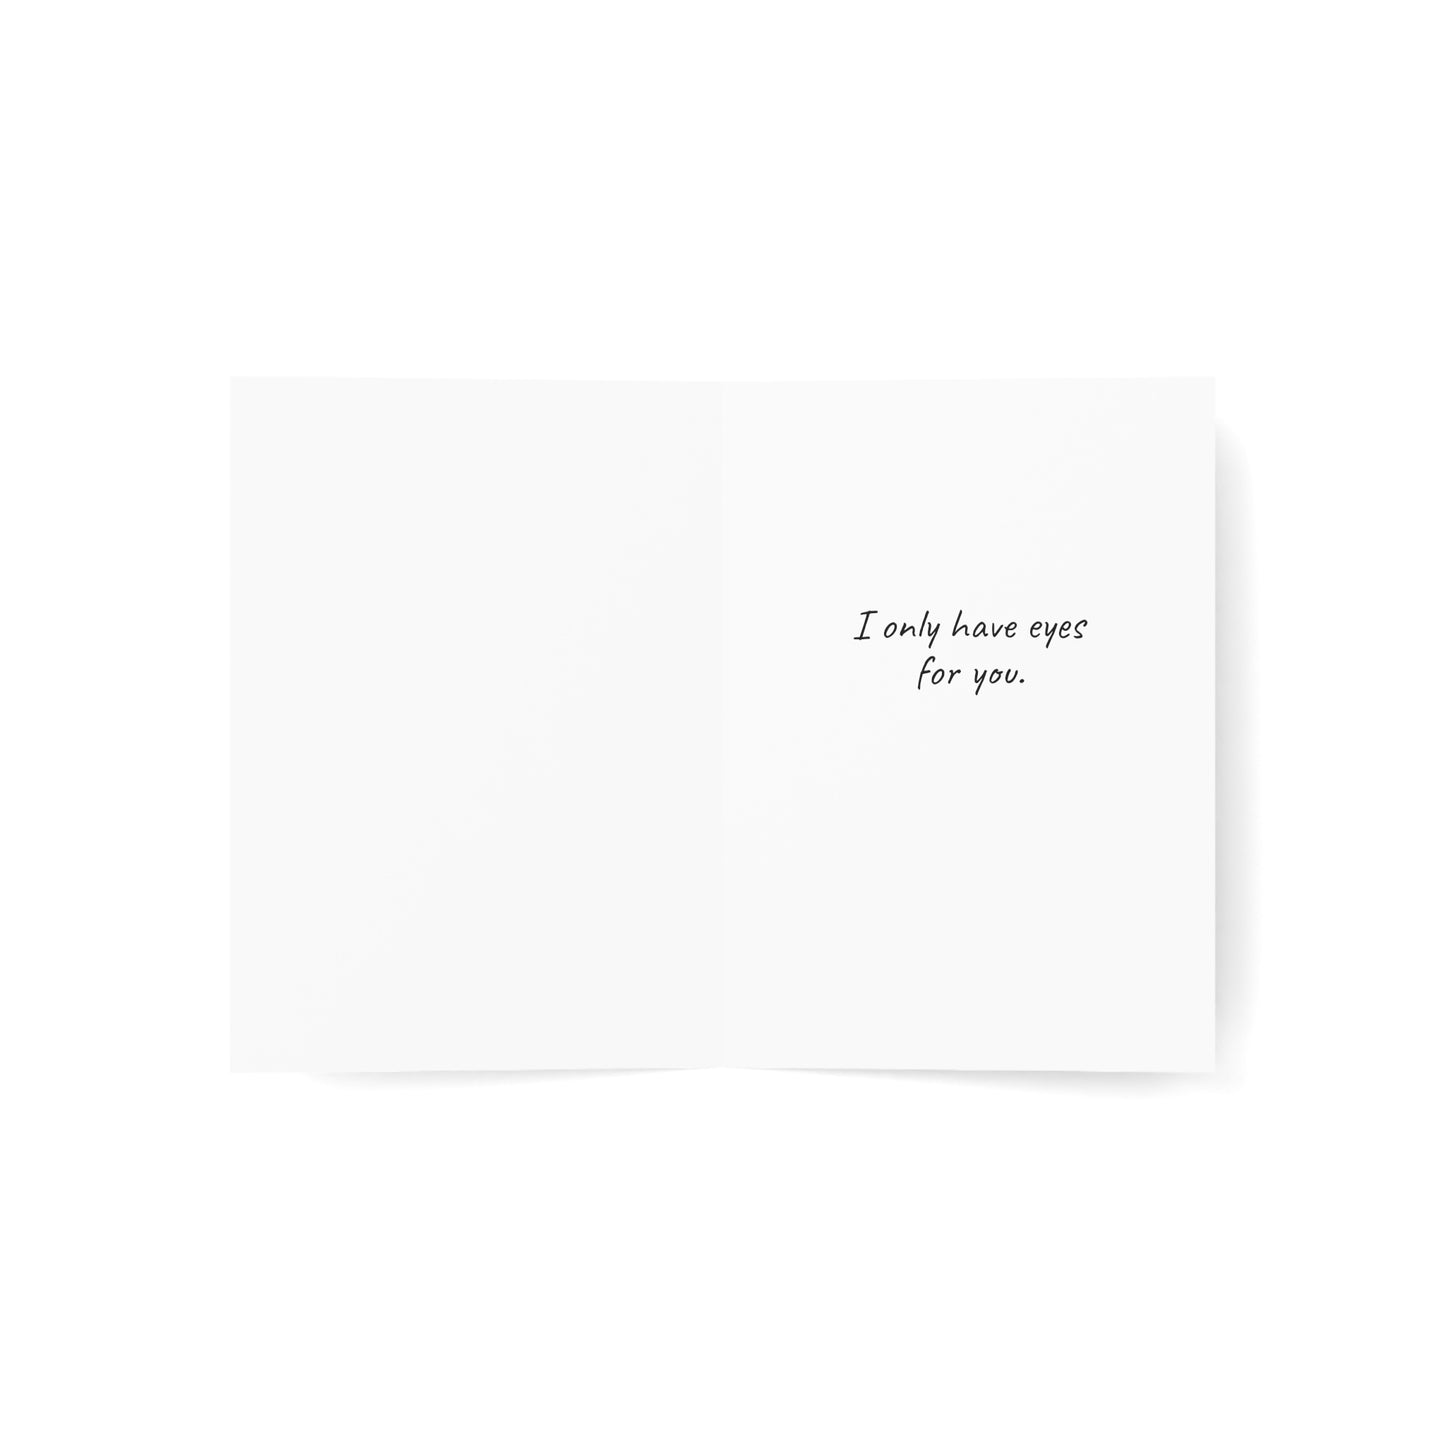 Romantic Couple in Paris "I only have eyes for you" Valentine (with sentiment) Greeting Cards